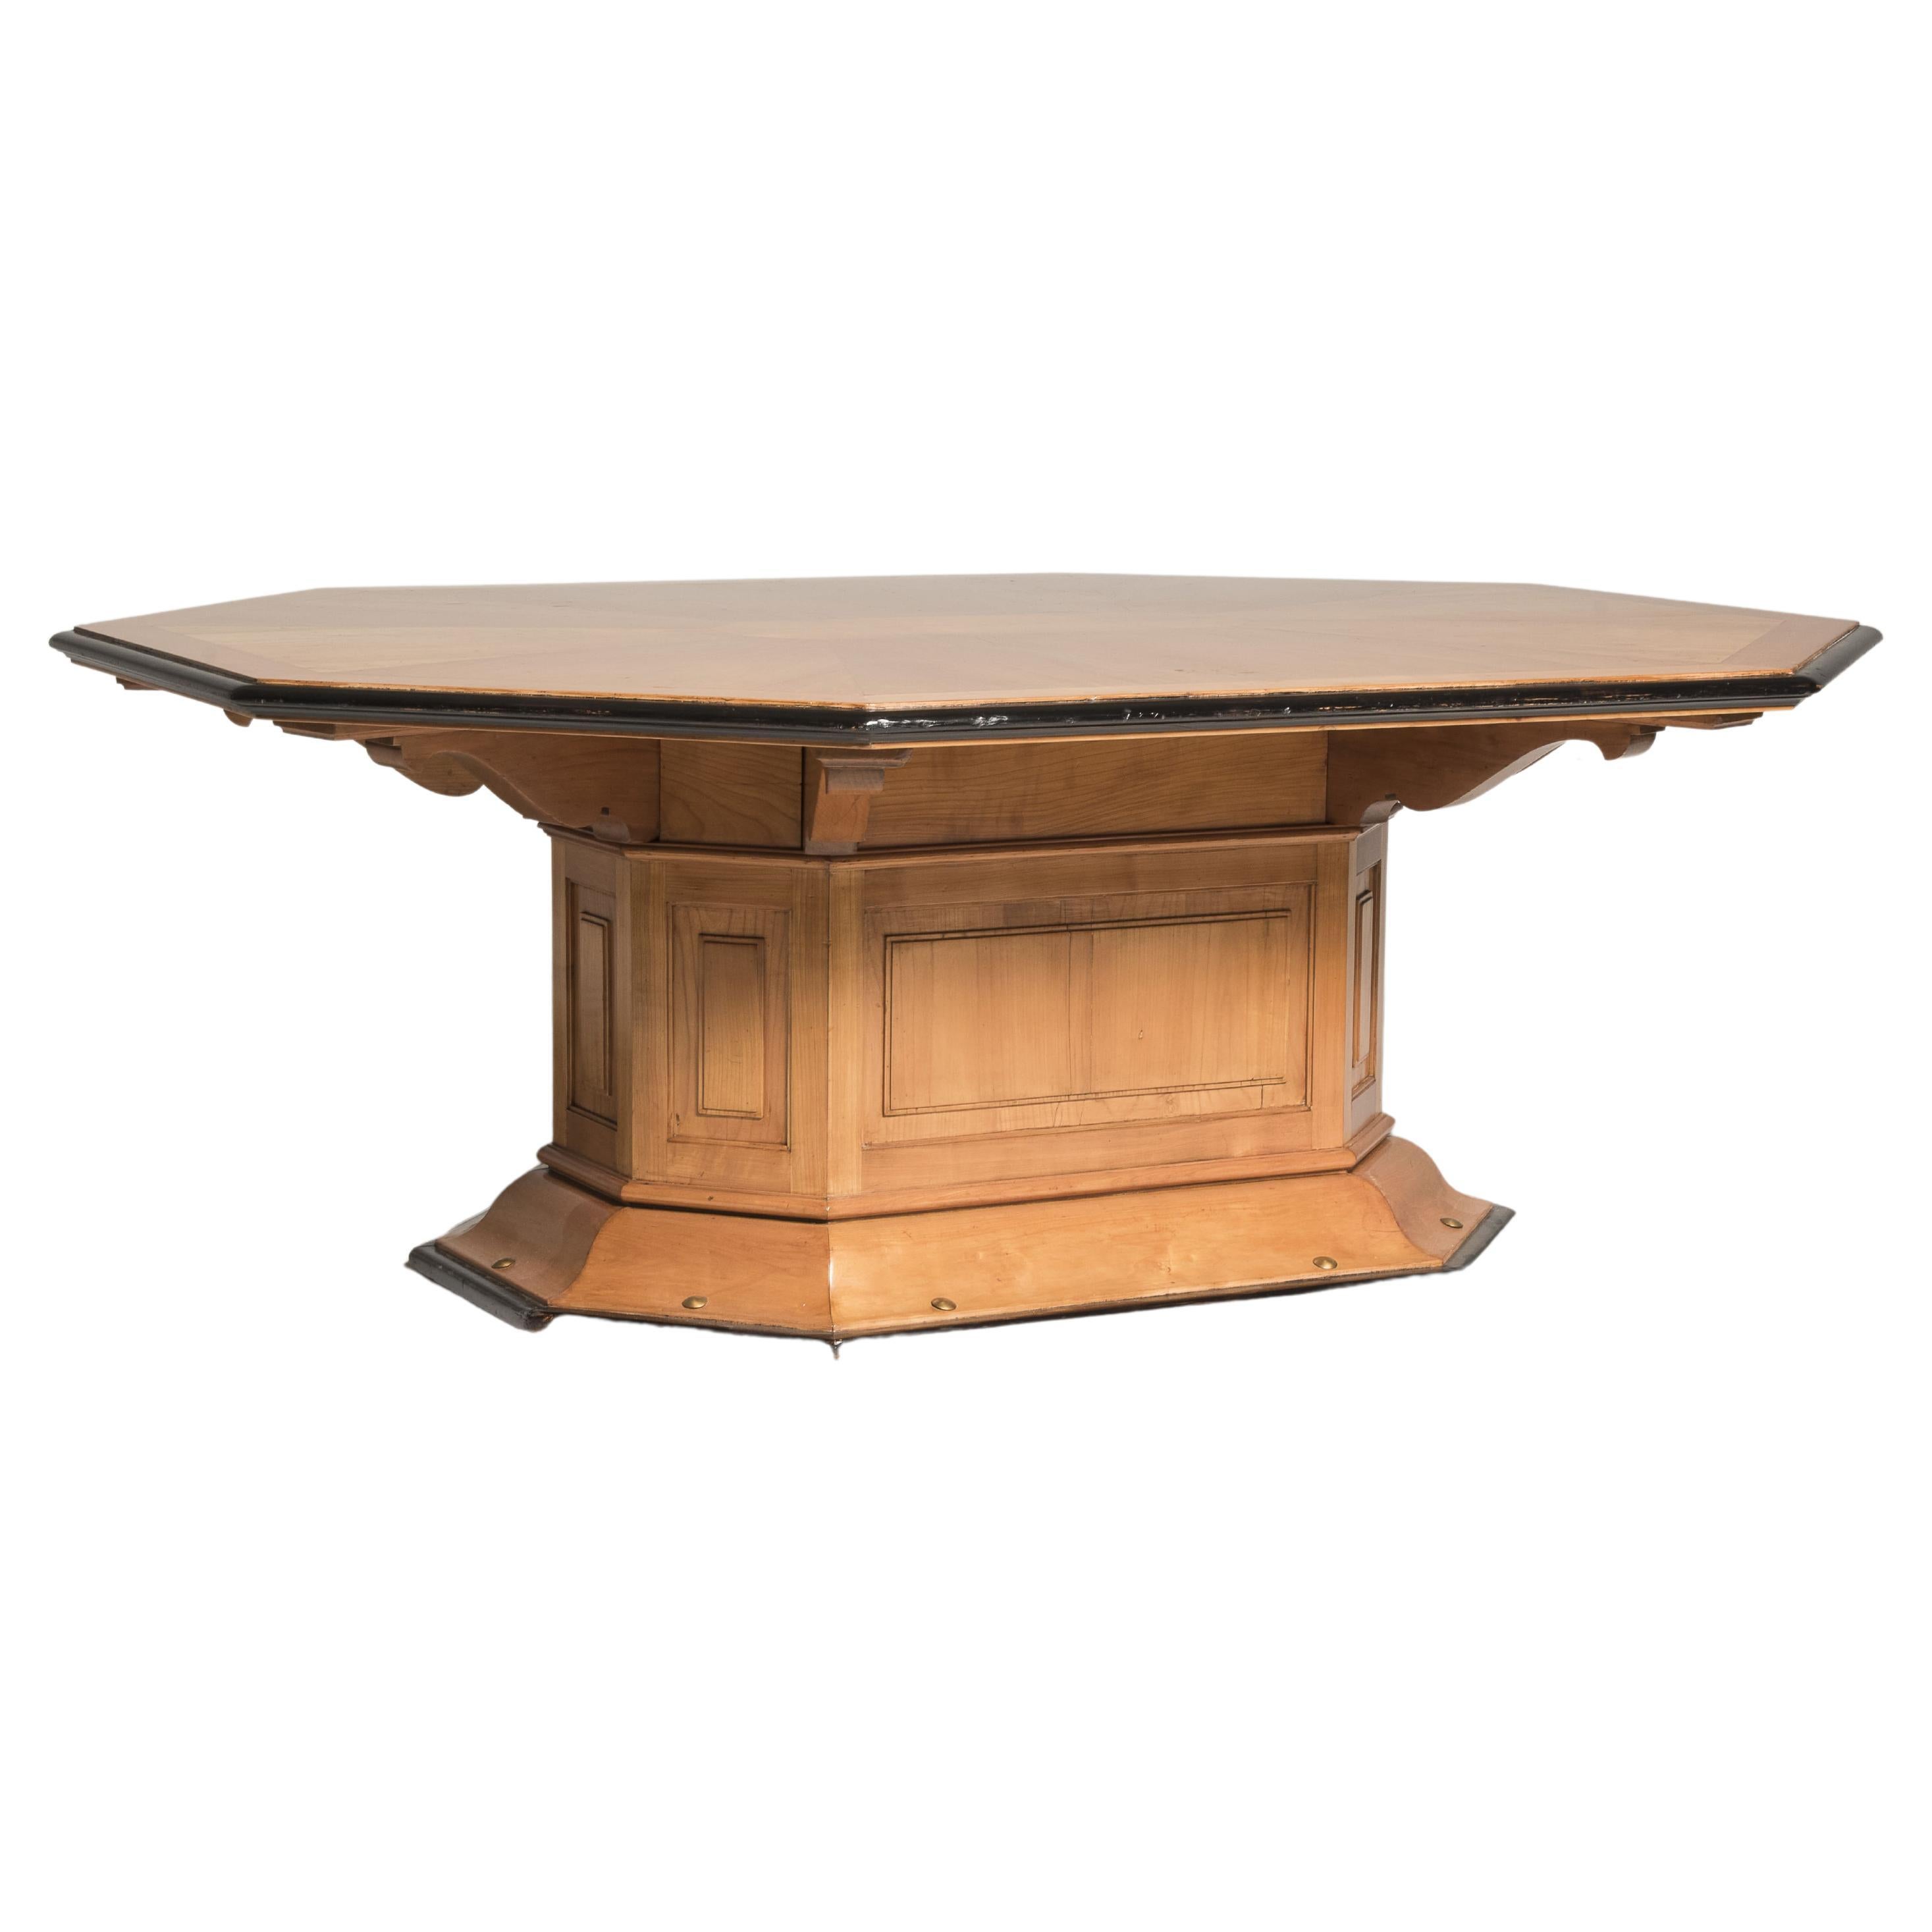 Art Deco Octagonal Cherrywood Table with Black Borders and Brass Details For Sale